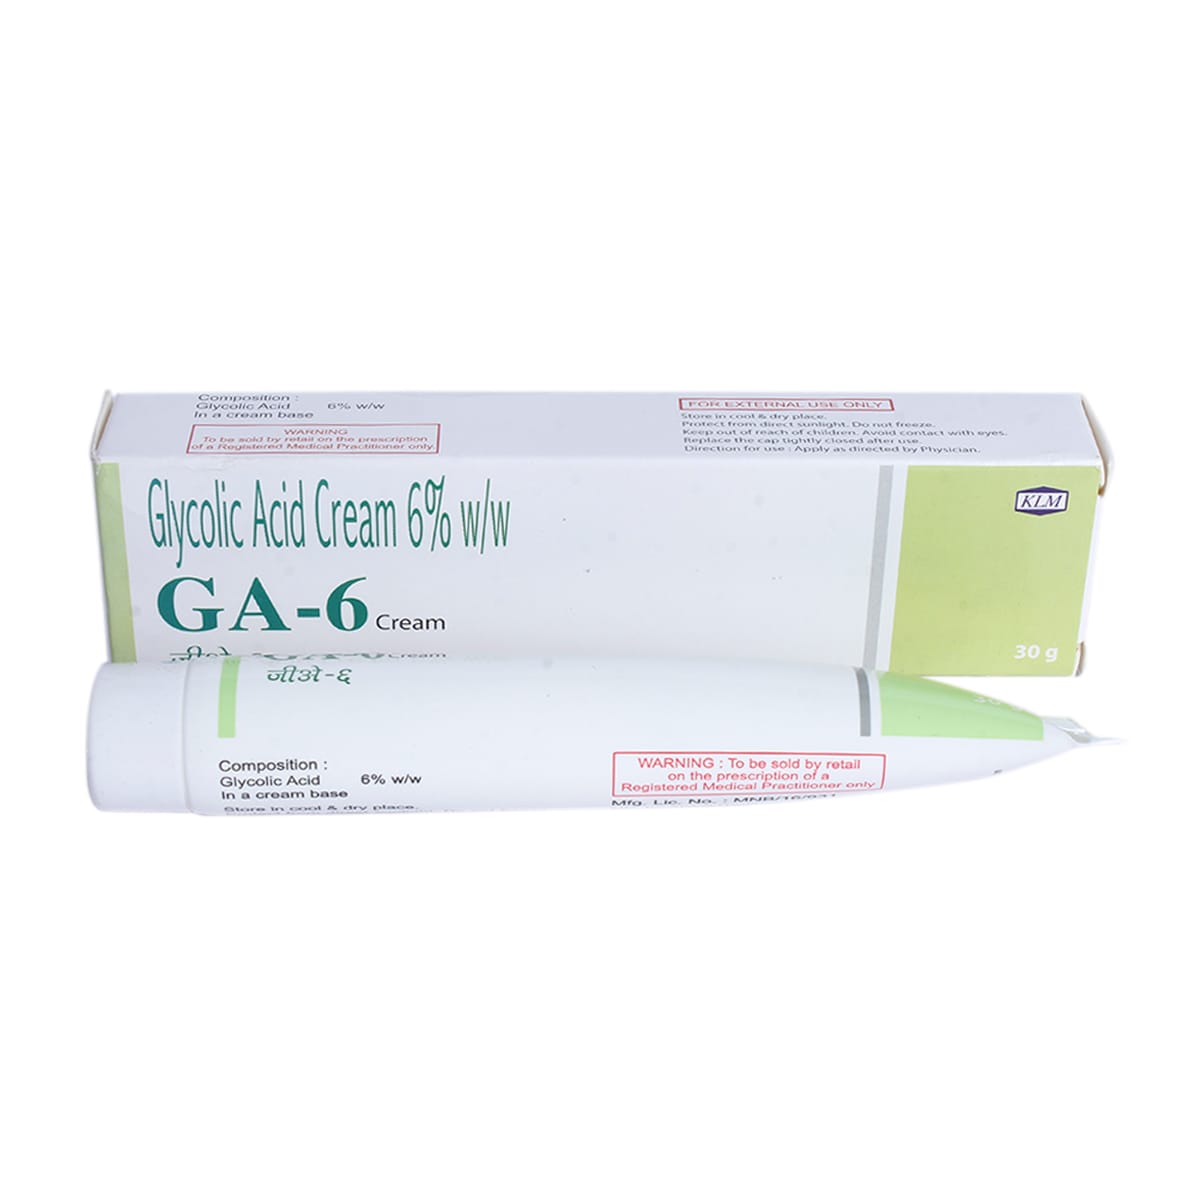 GA-6 Cream 30 gm Price, Uses, Side Effects, Composition - Apollo Pharmacy